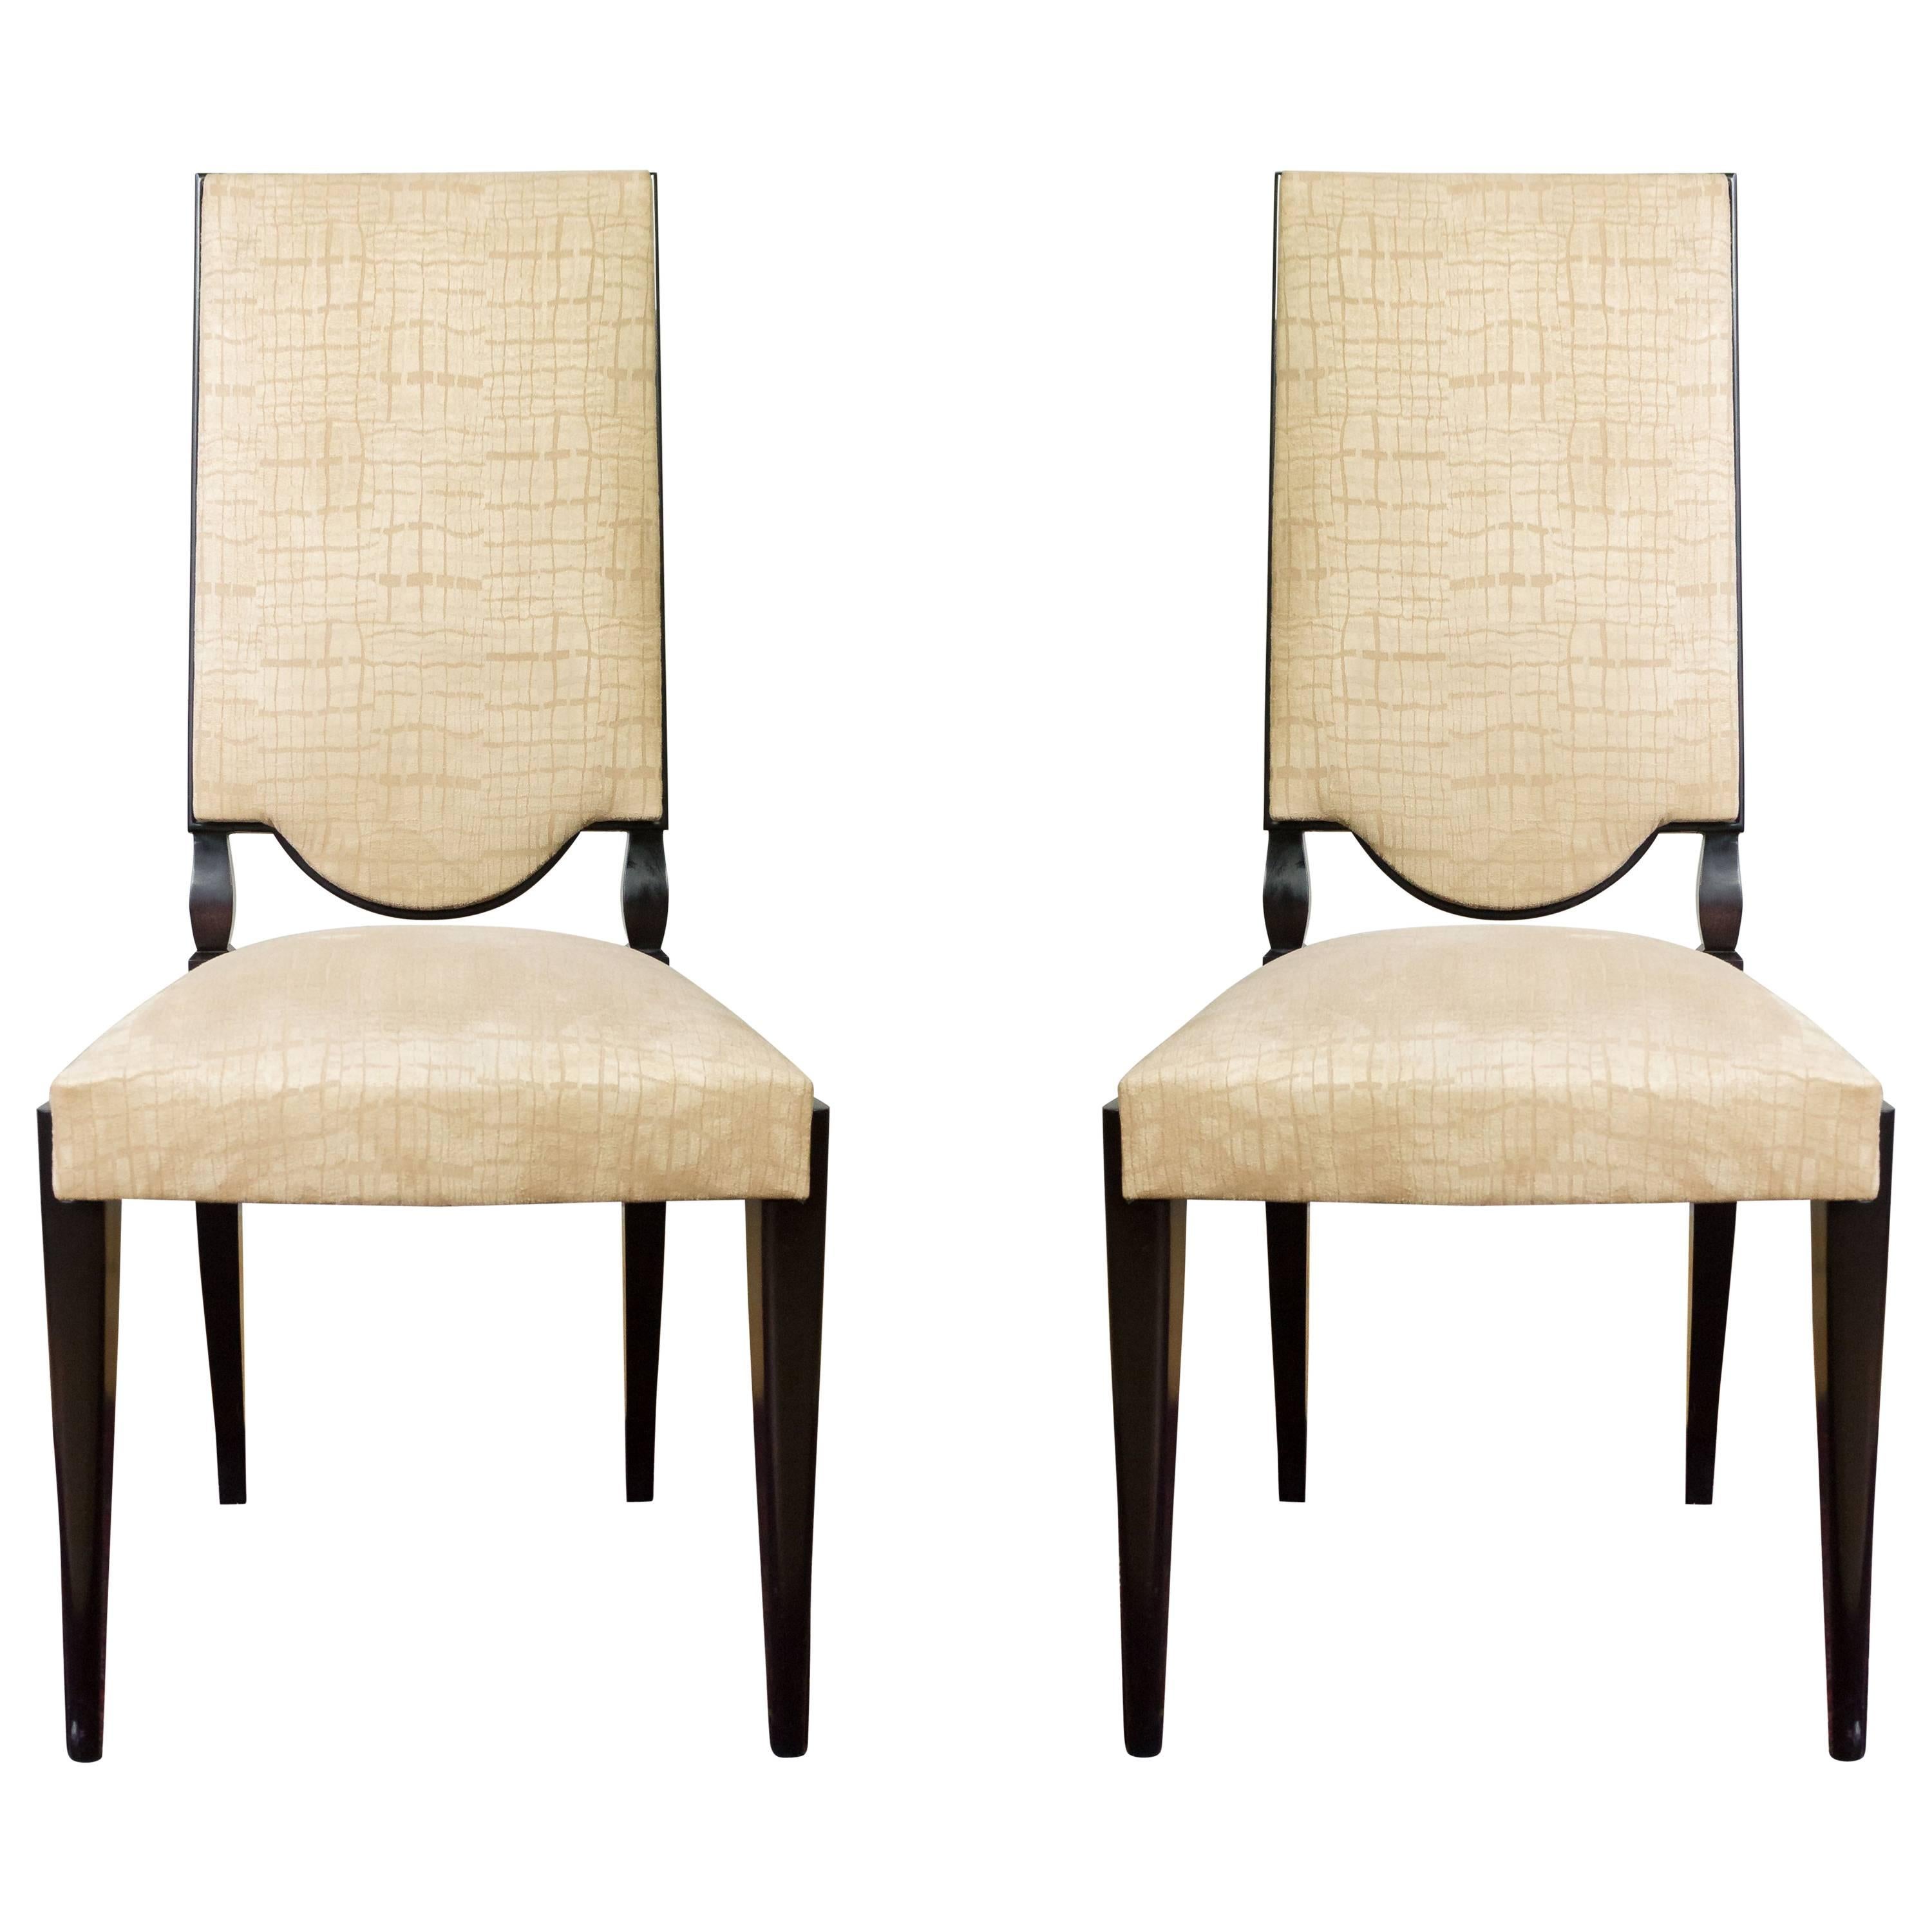 Pair of High Back Dining Chairs